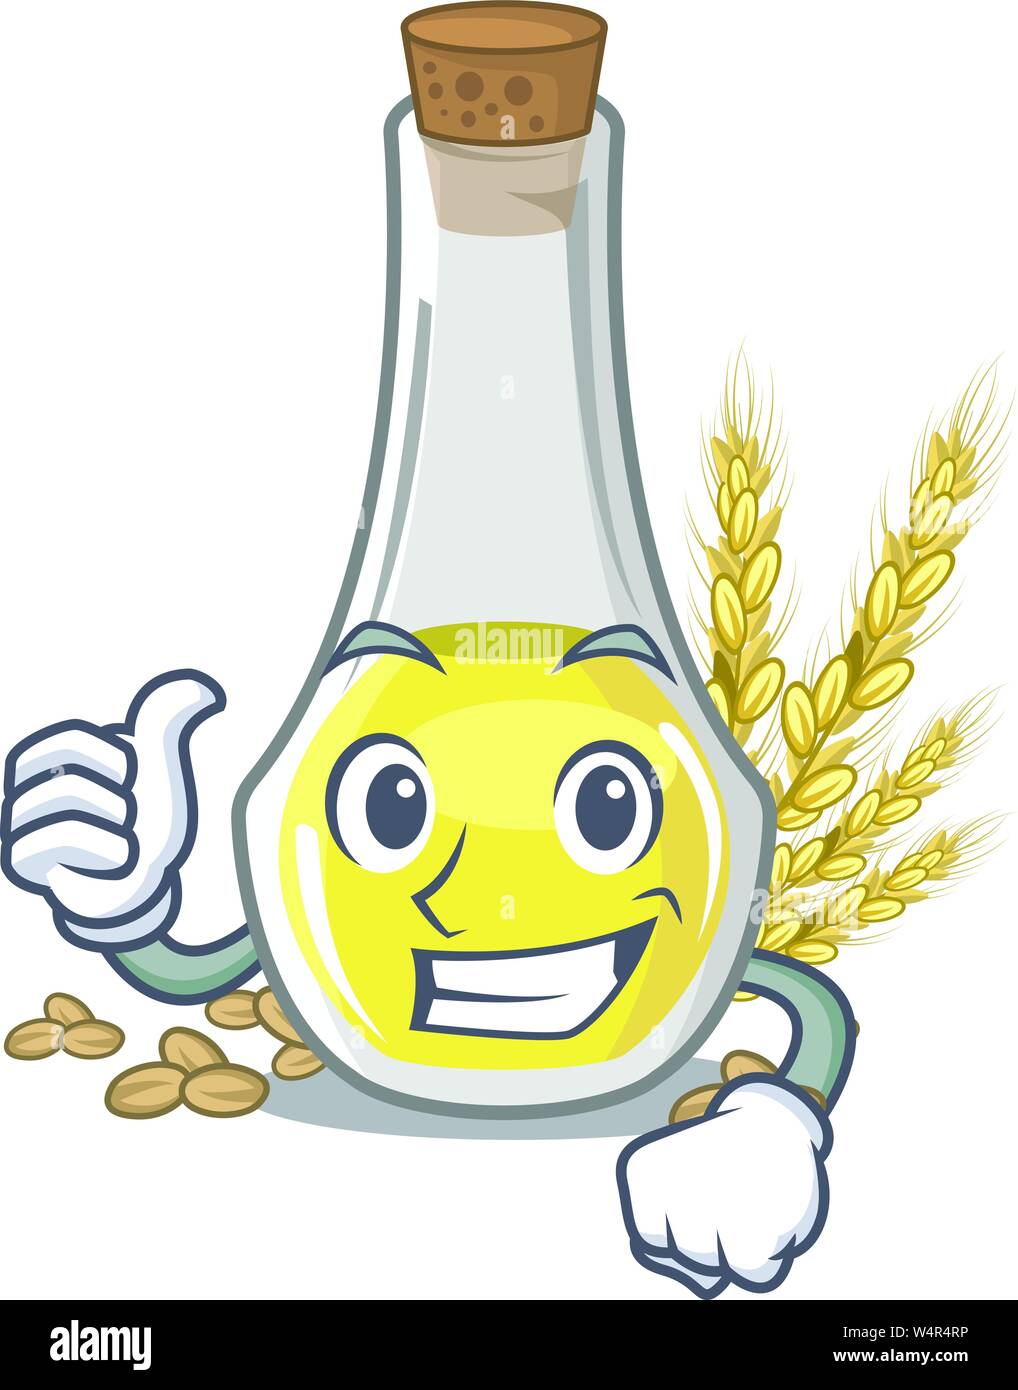 Thumbs up wheat germ oil the mascot shape vector illustration Stock Vector